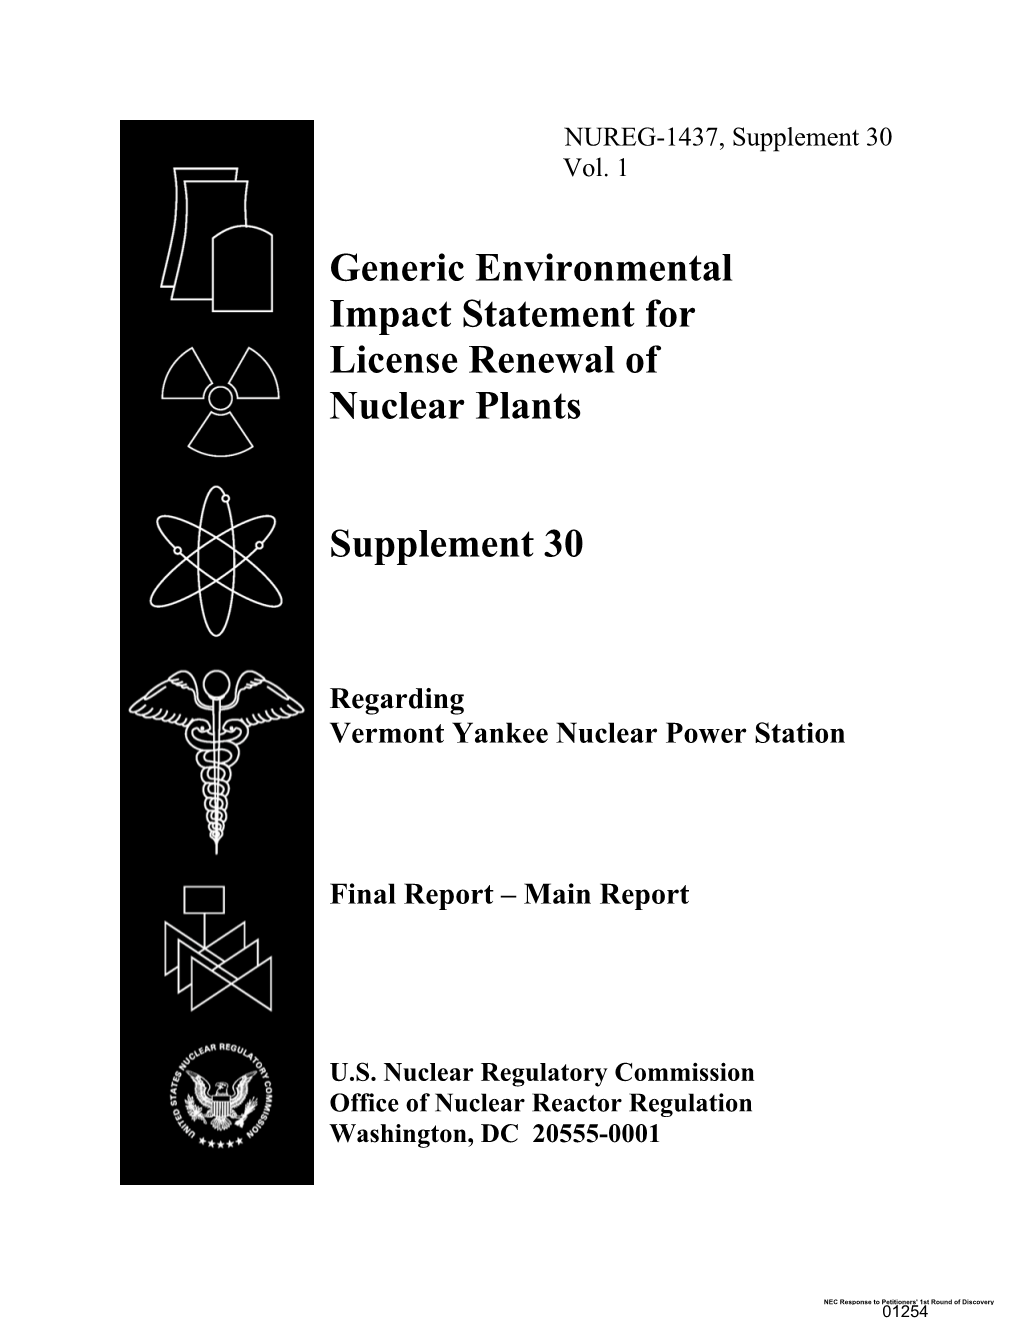 Generic Environmental Impact Statement for the License Renewal of Nuclear Plants: Regarding